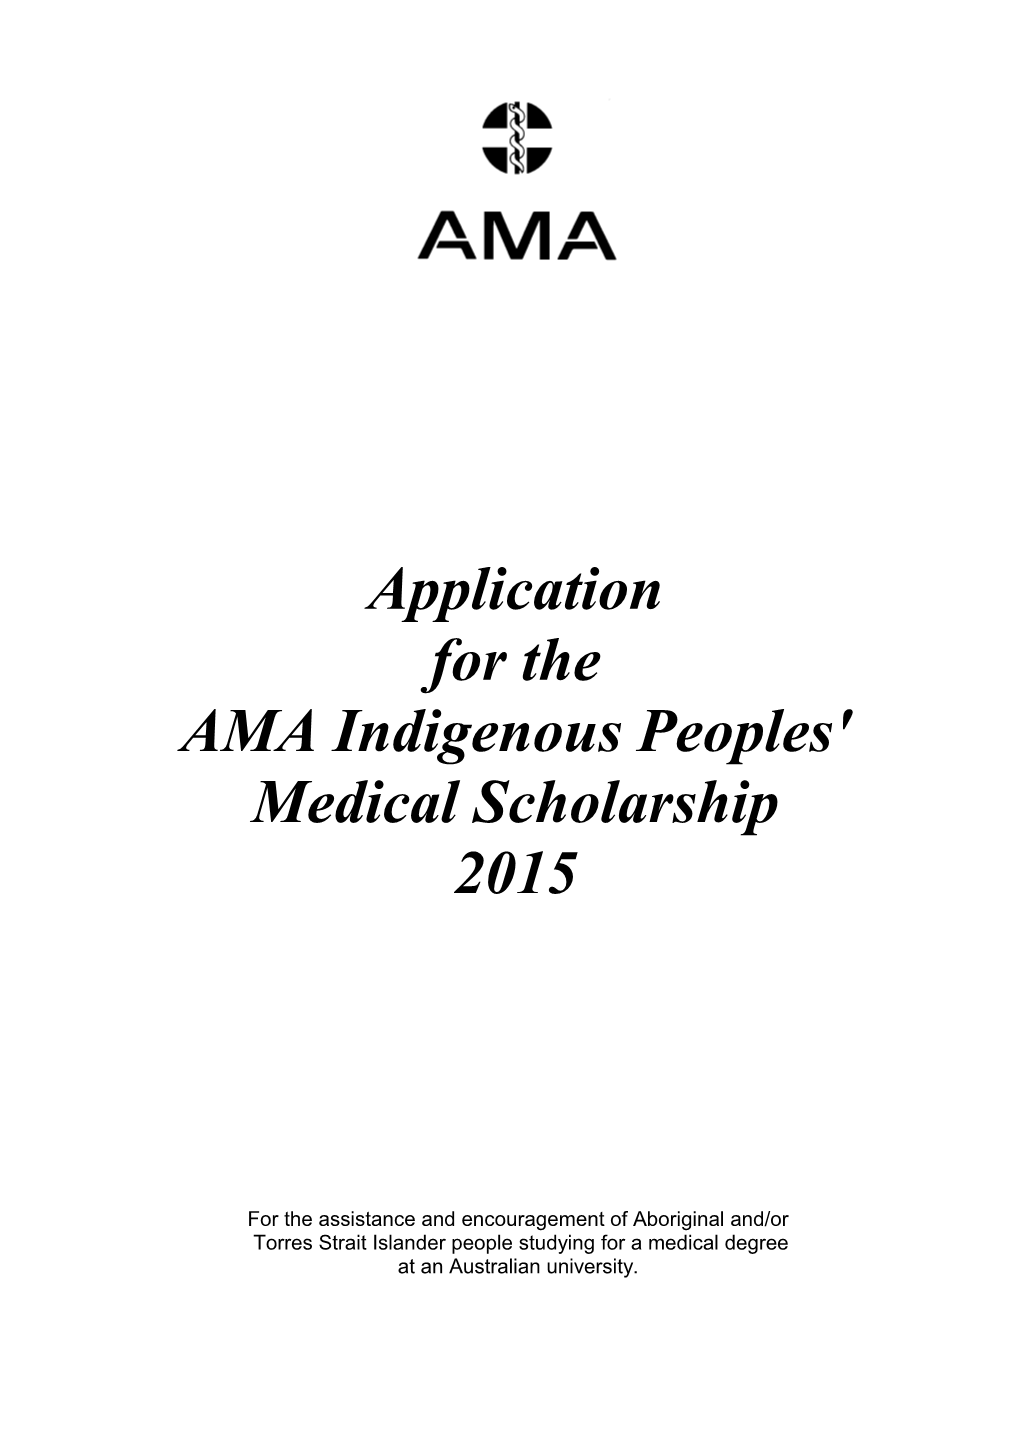 Indigenous Peoples' Medical Scholarship Trust Fund